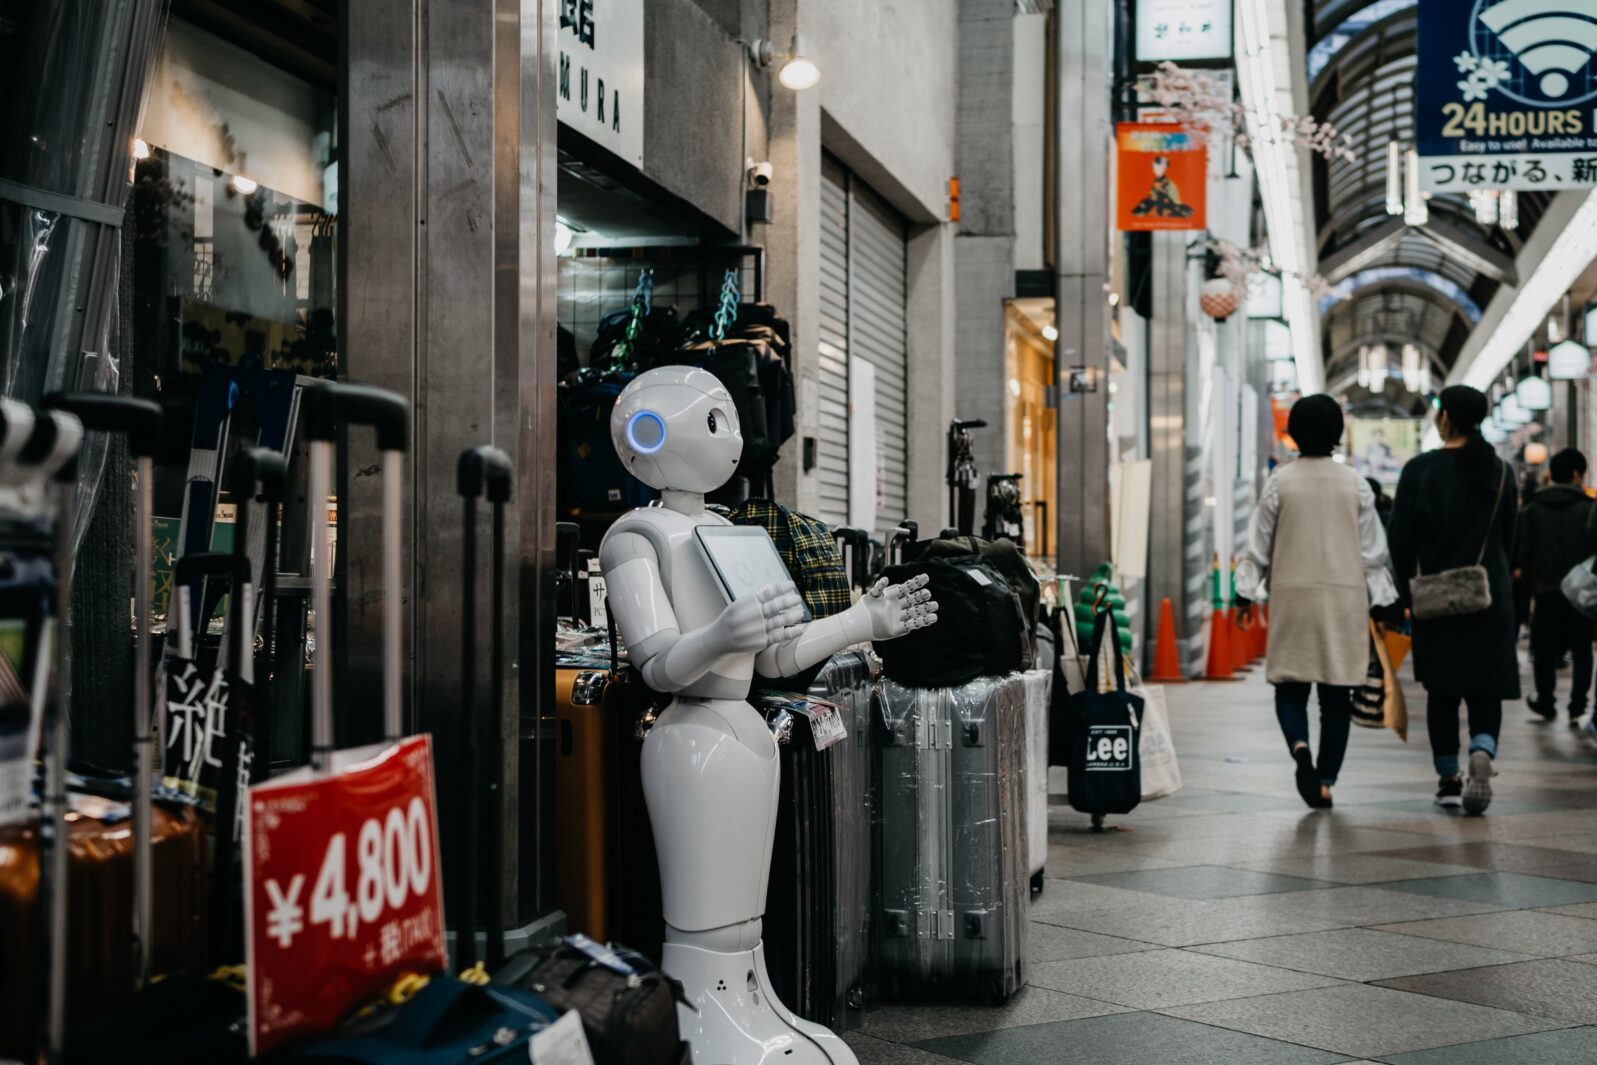 Robot in Shopping Mall in Kyoto